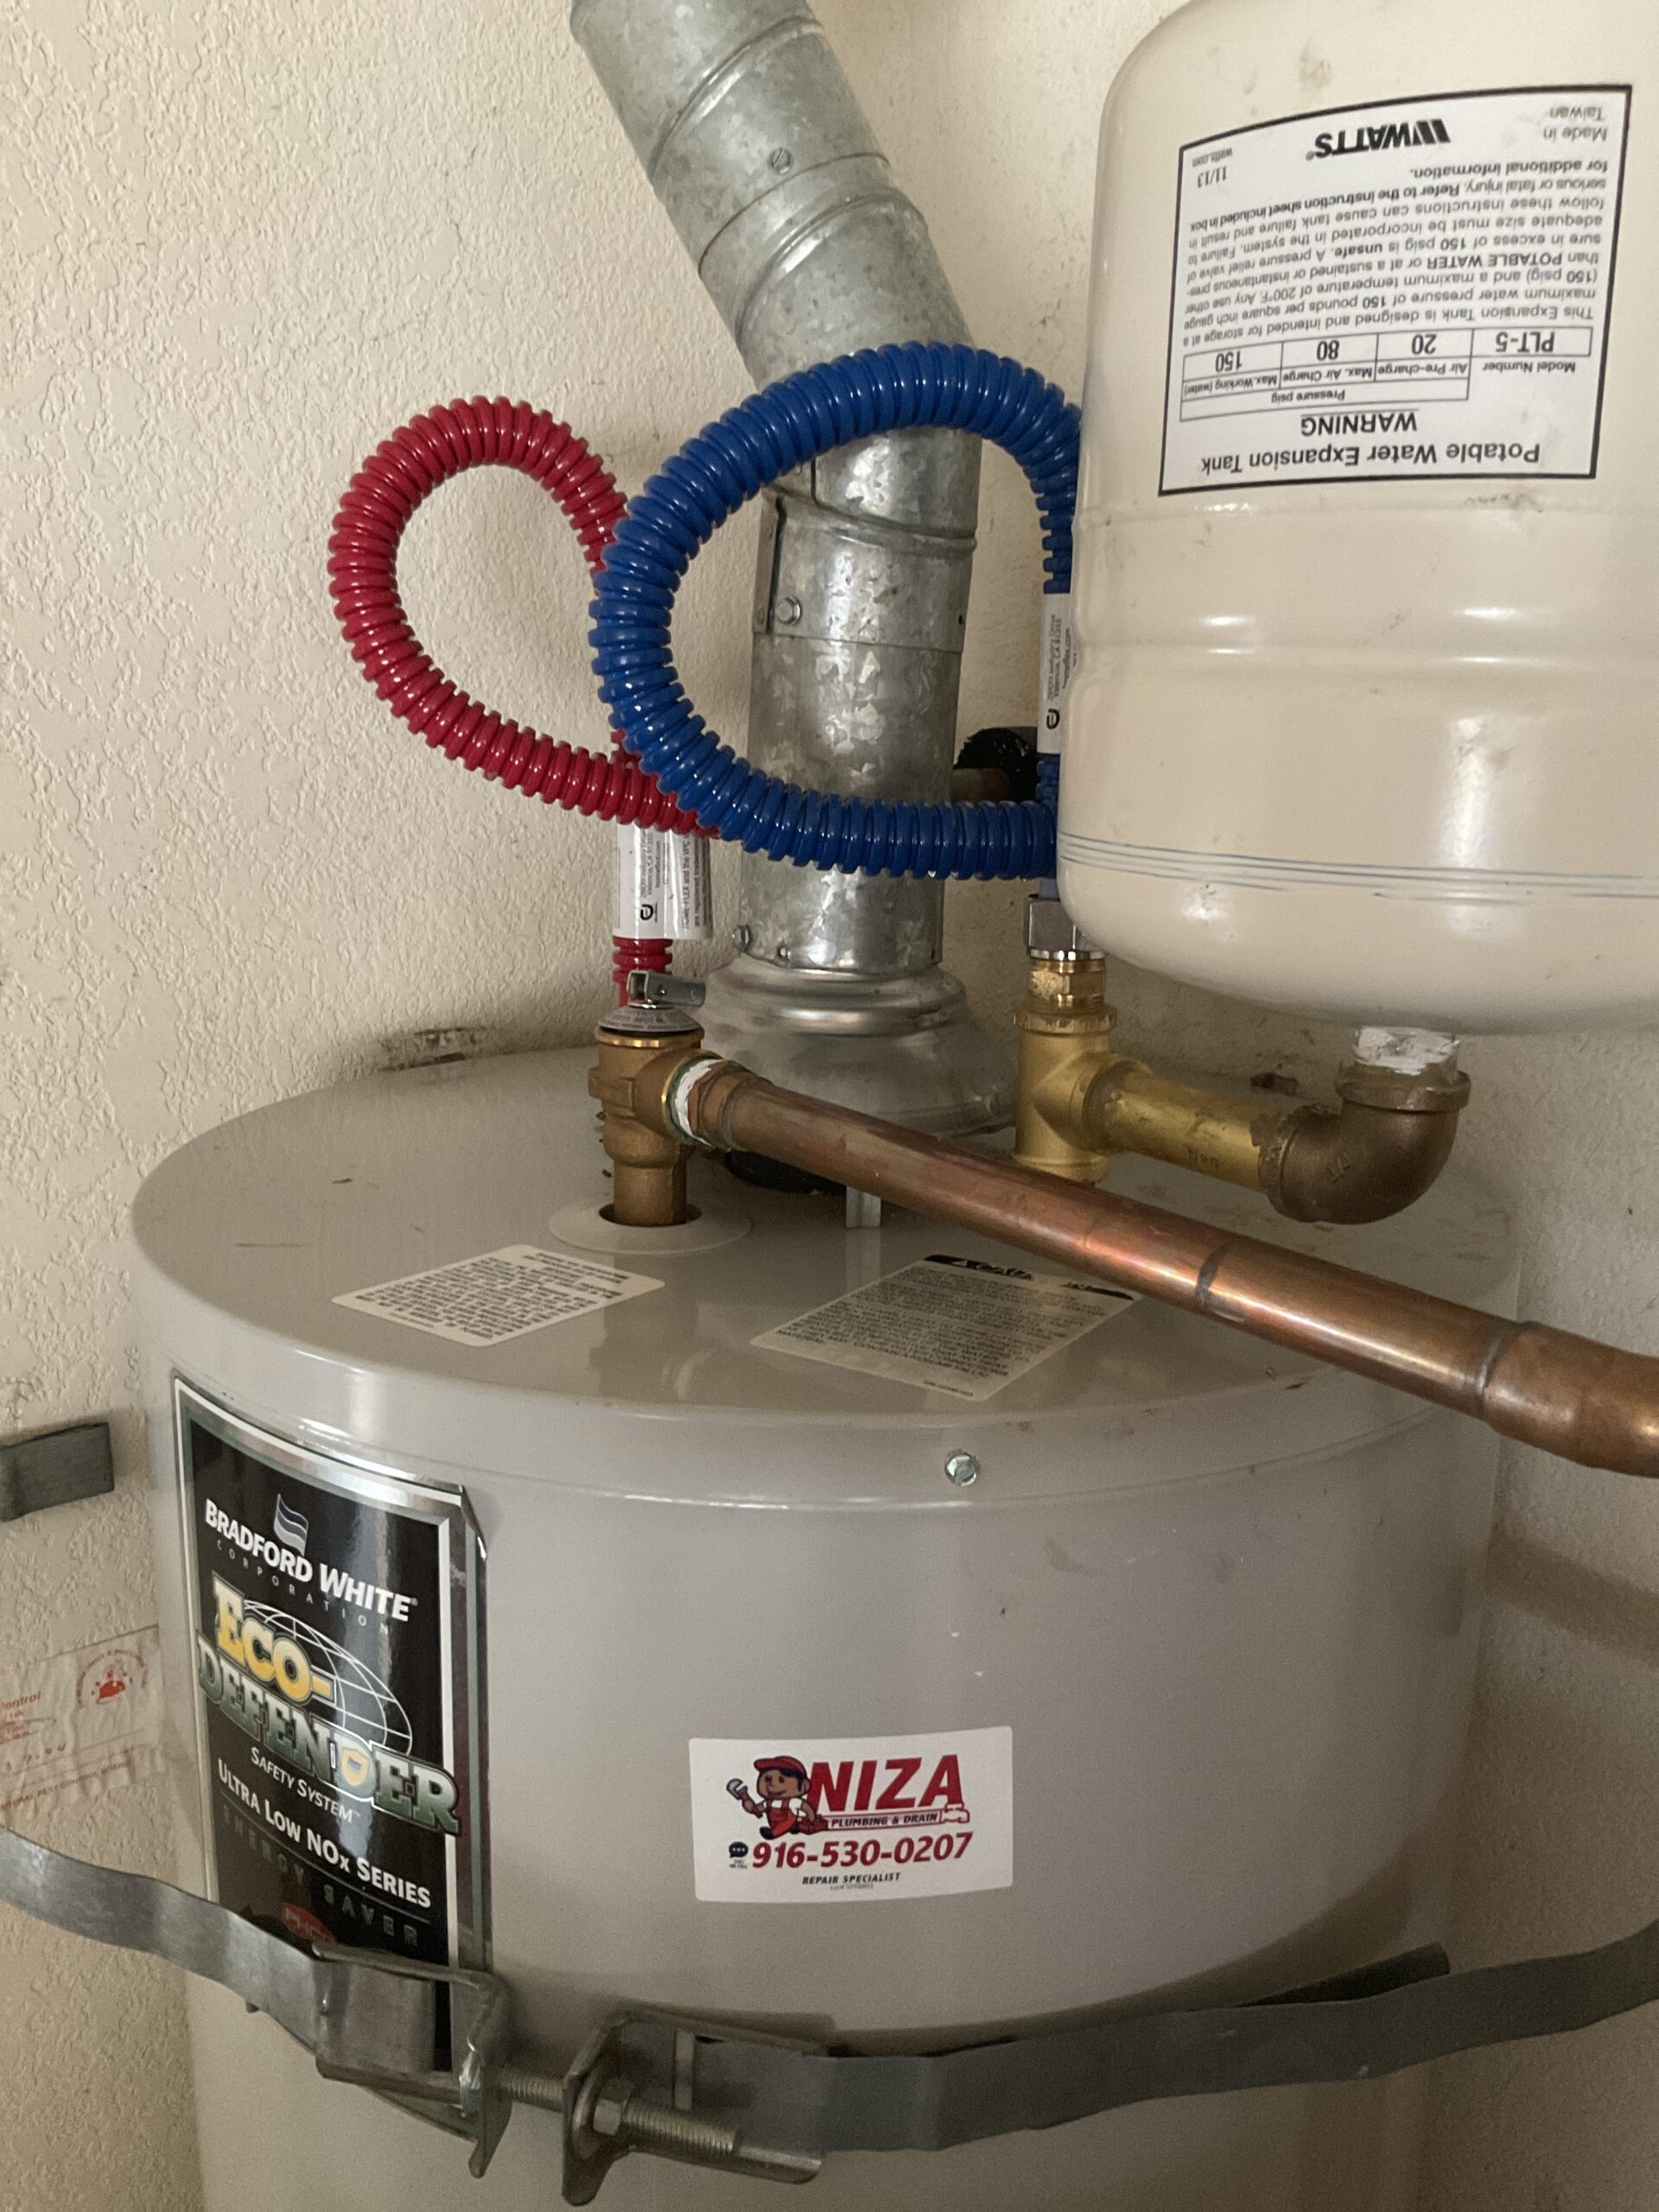 Expansion tank on water heater